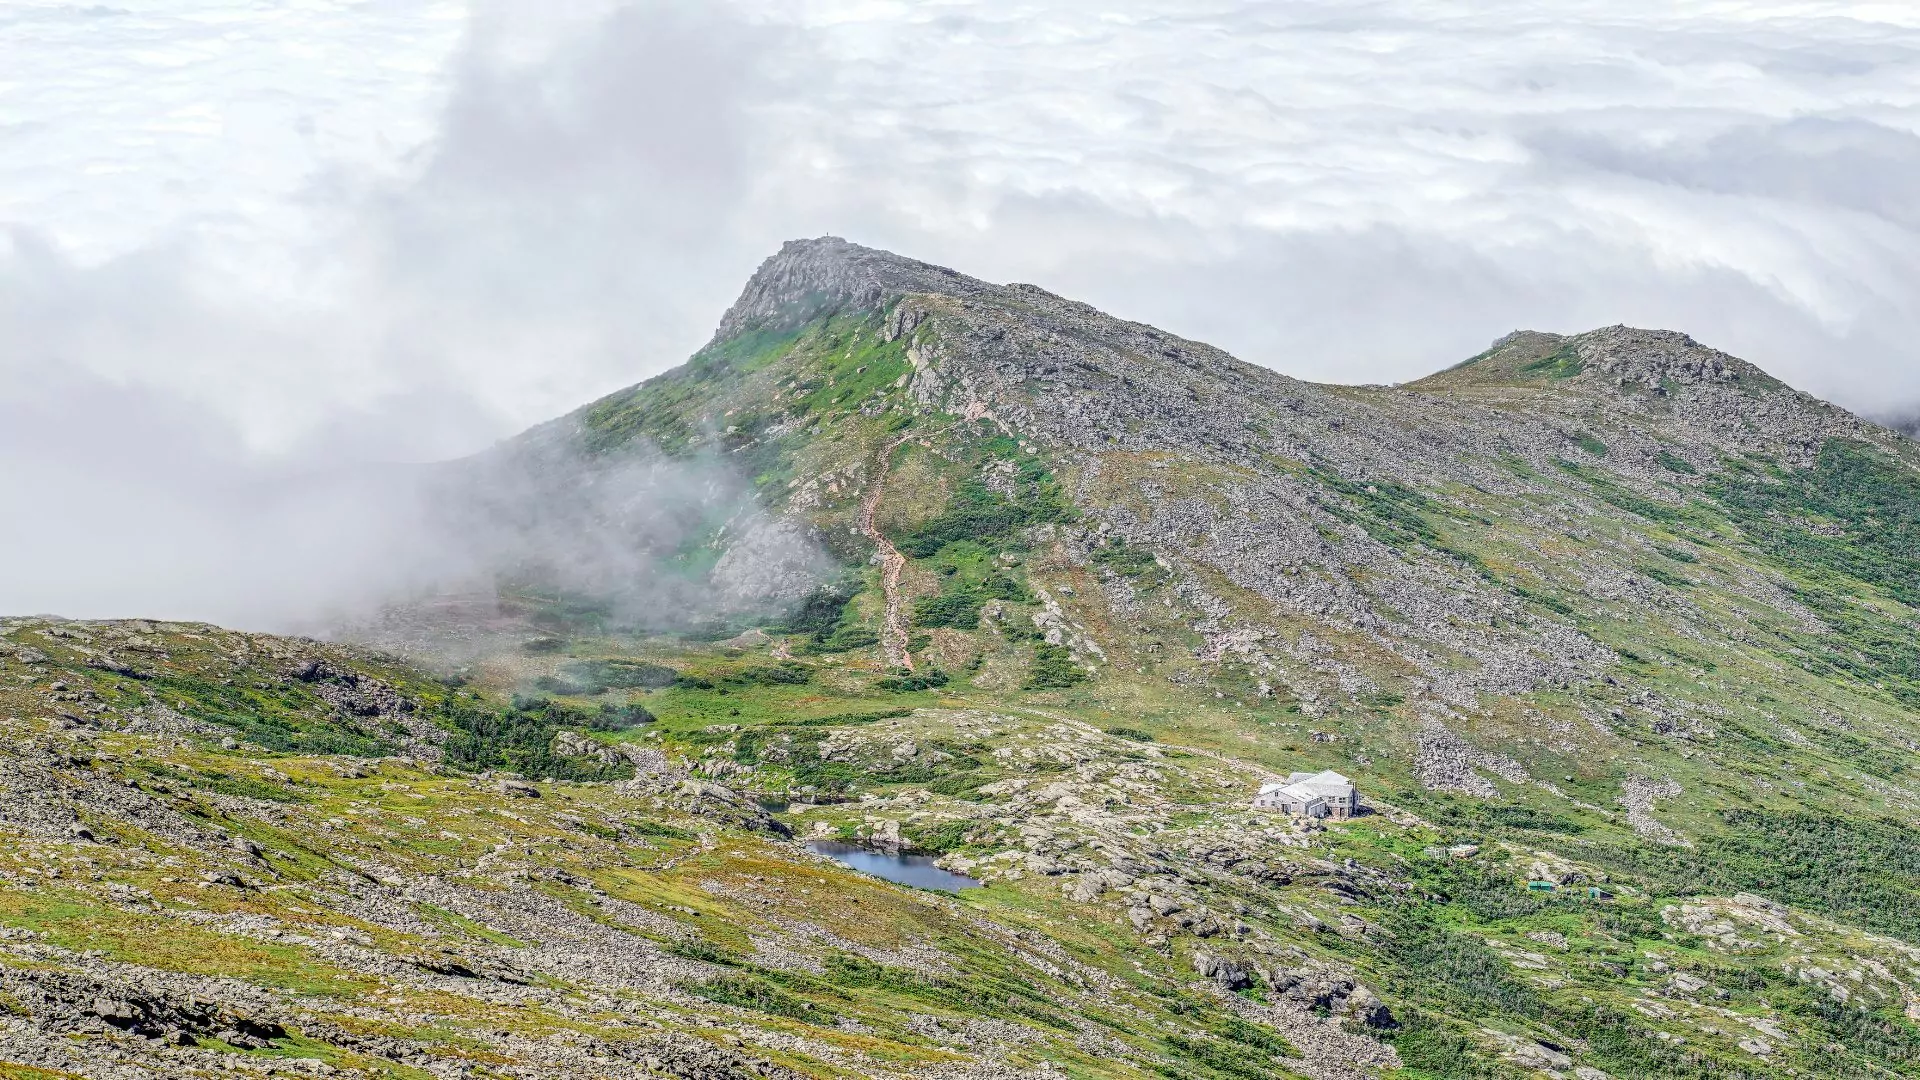 An Appalachian Mountan Club hut sits on the slopes of the Presidential traverse in the White Mountains of New Hampshire